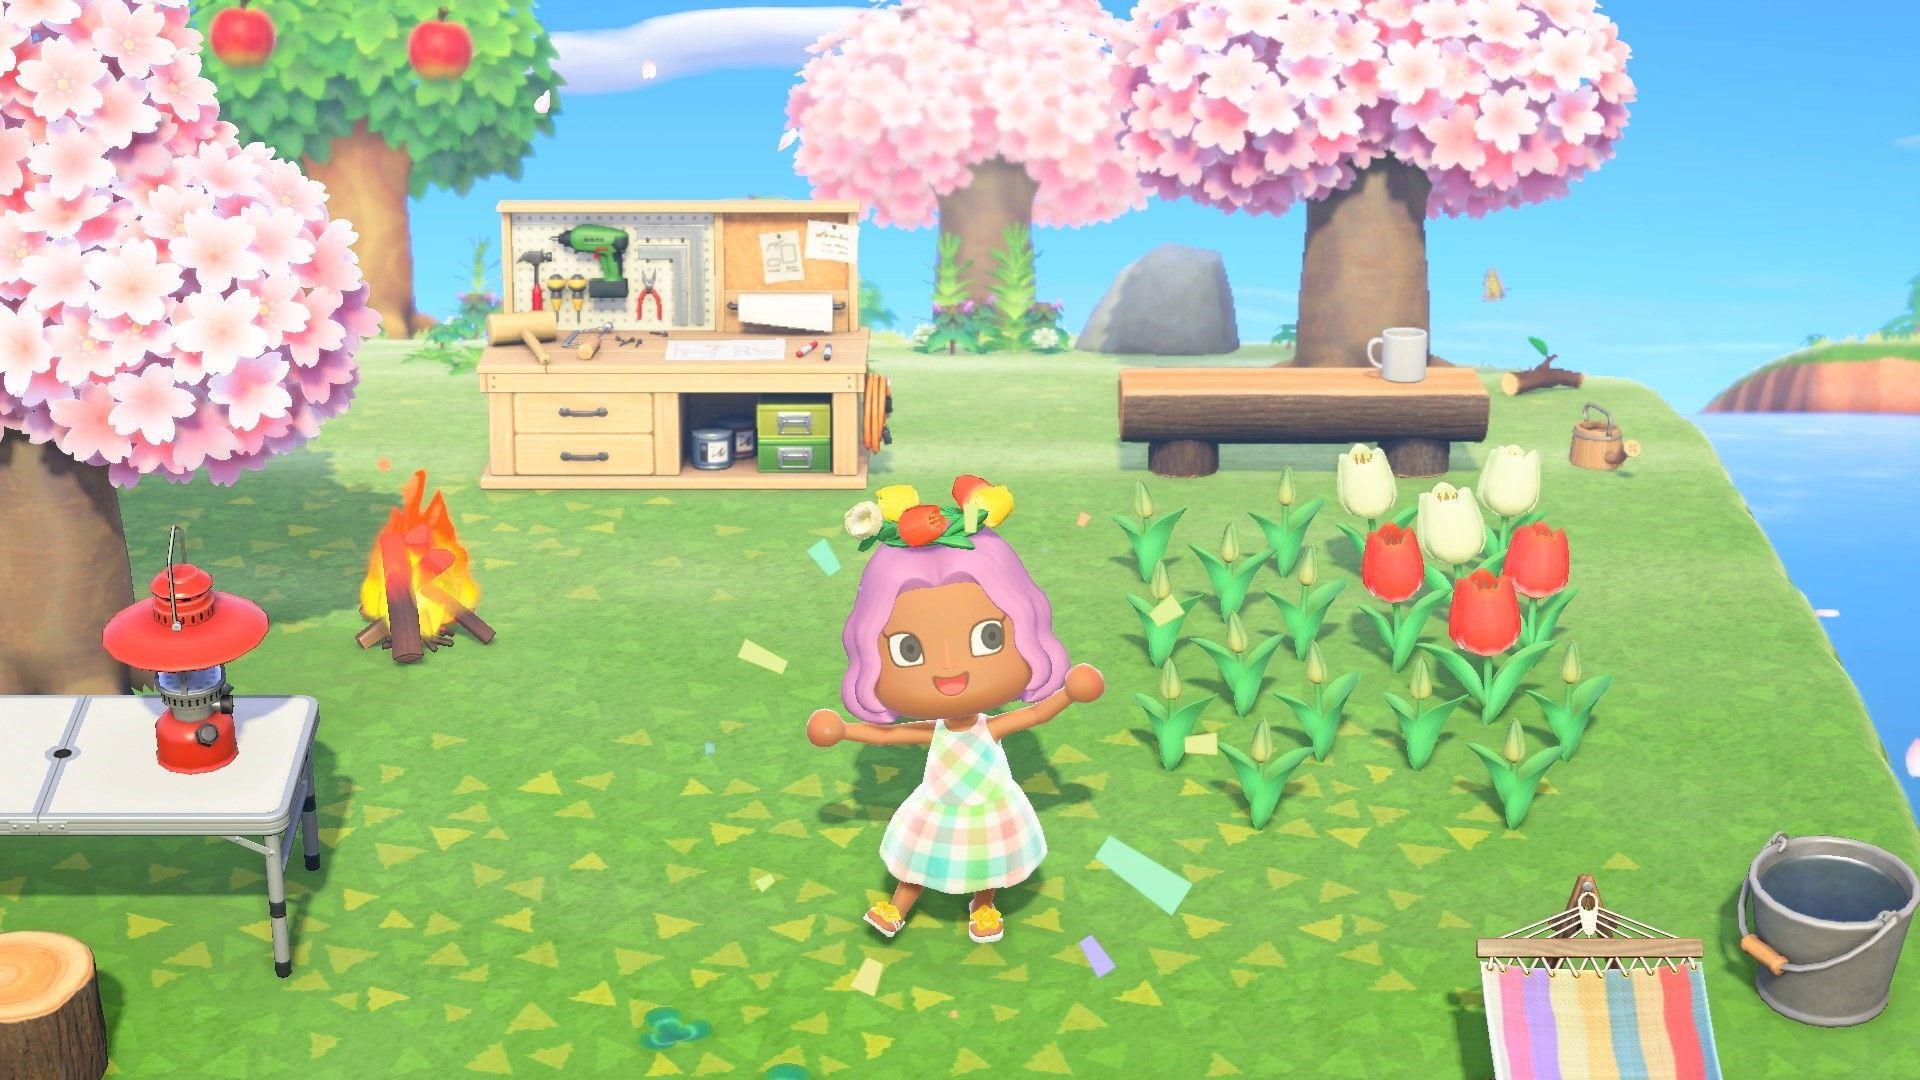 animal crossing new horizons for pc free download